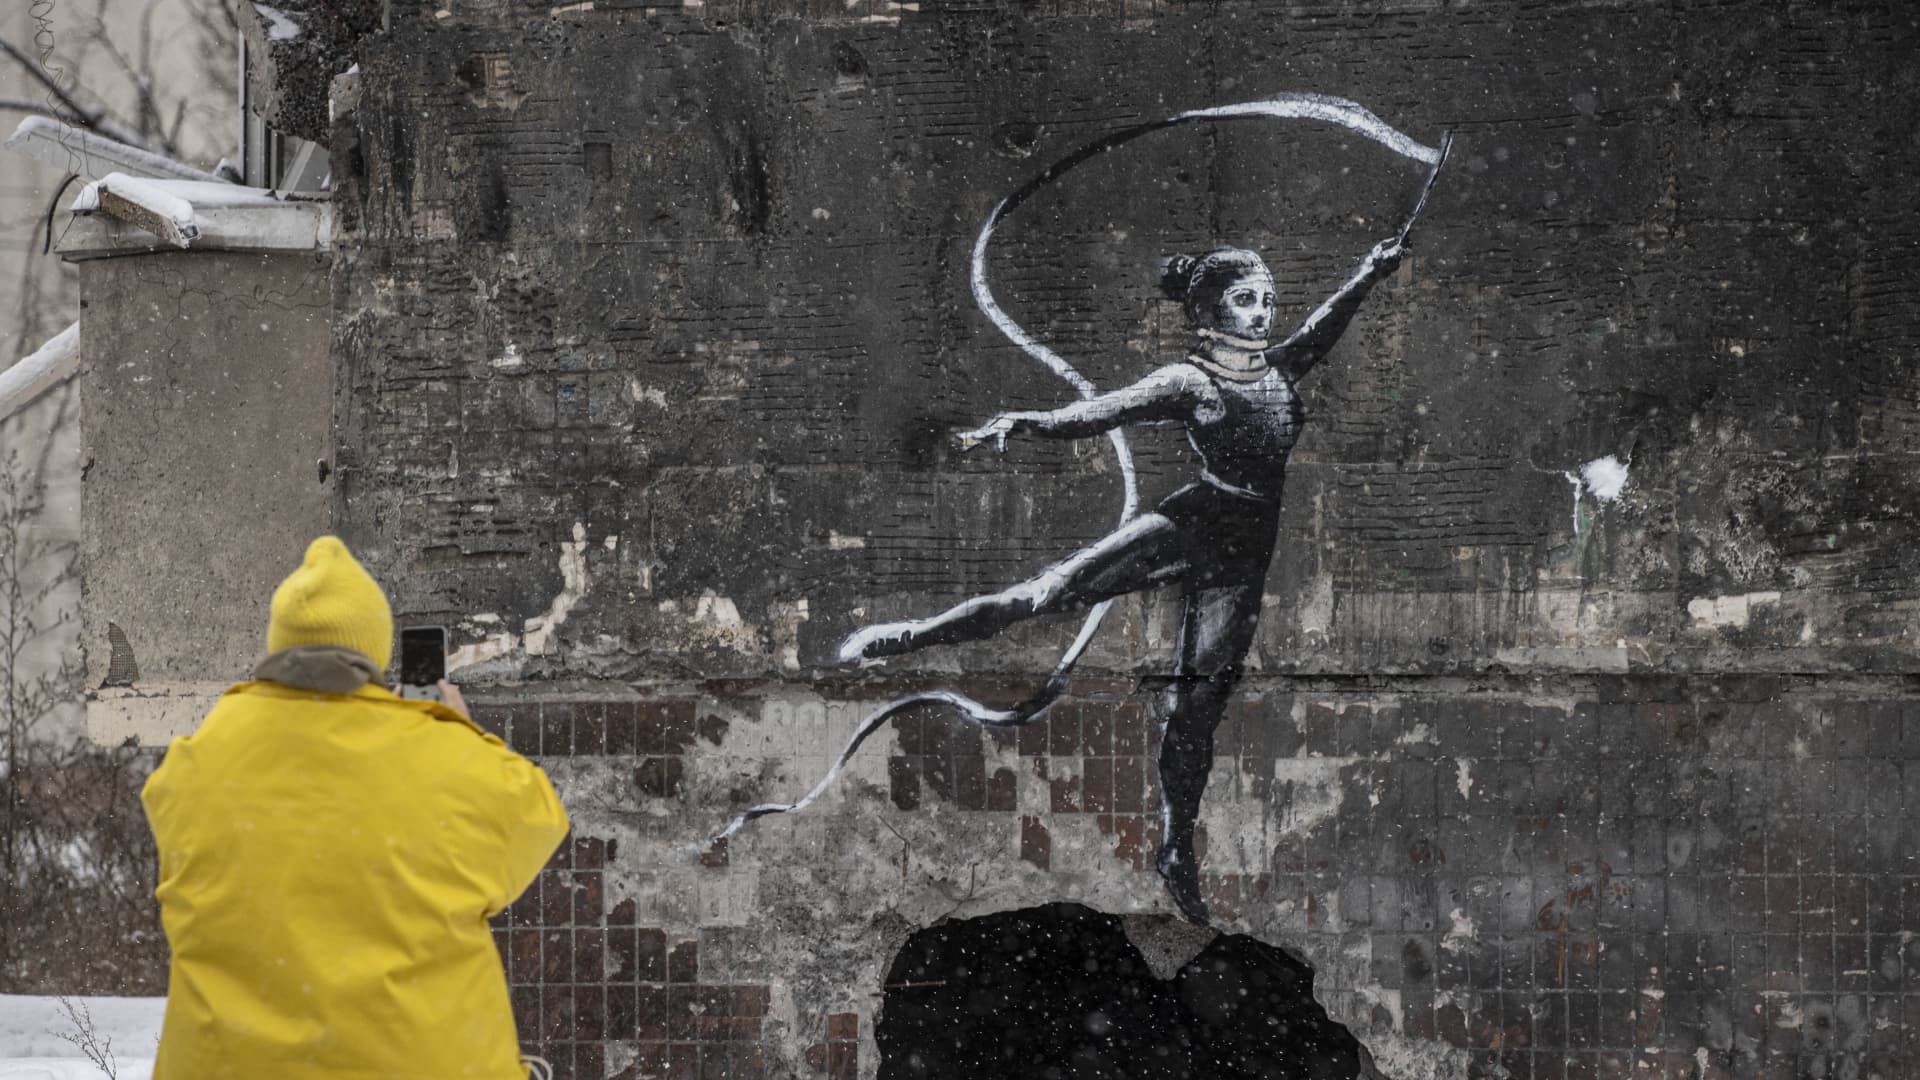 A person takes a photo of graffiti created by England-based street artist, Banksy, in Irpin located Kyiv district, Ukraine on November 19, 2022.